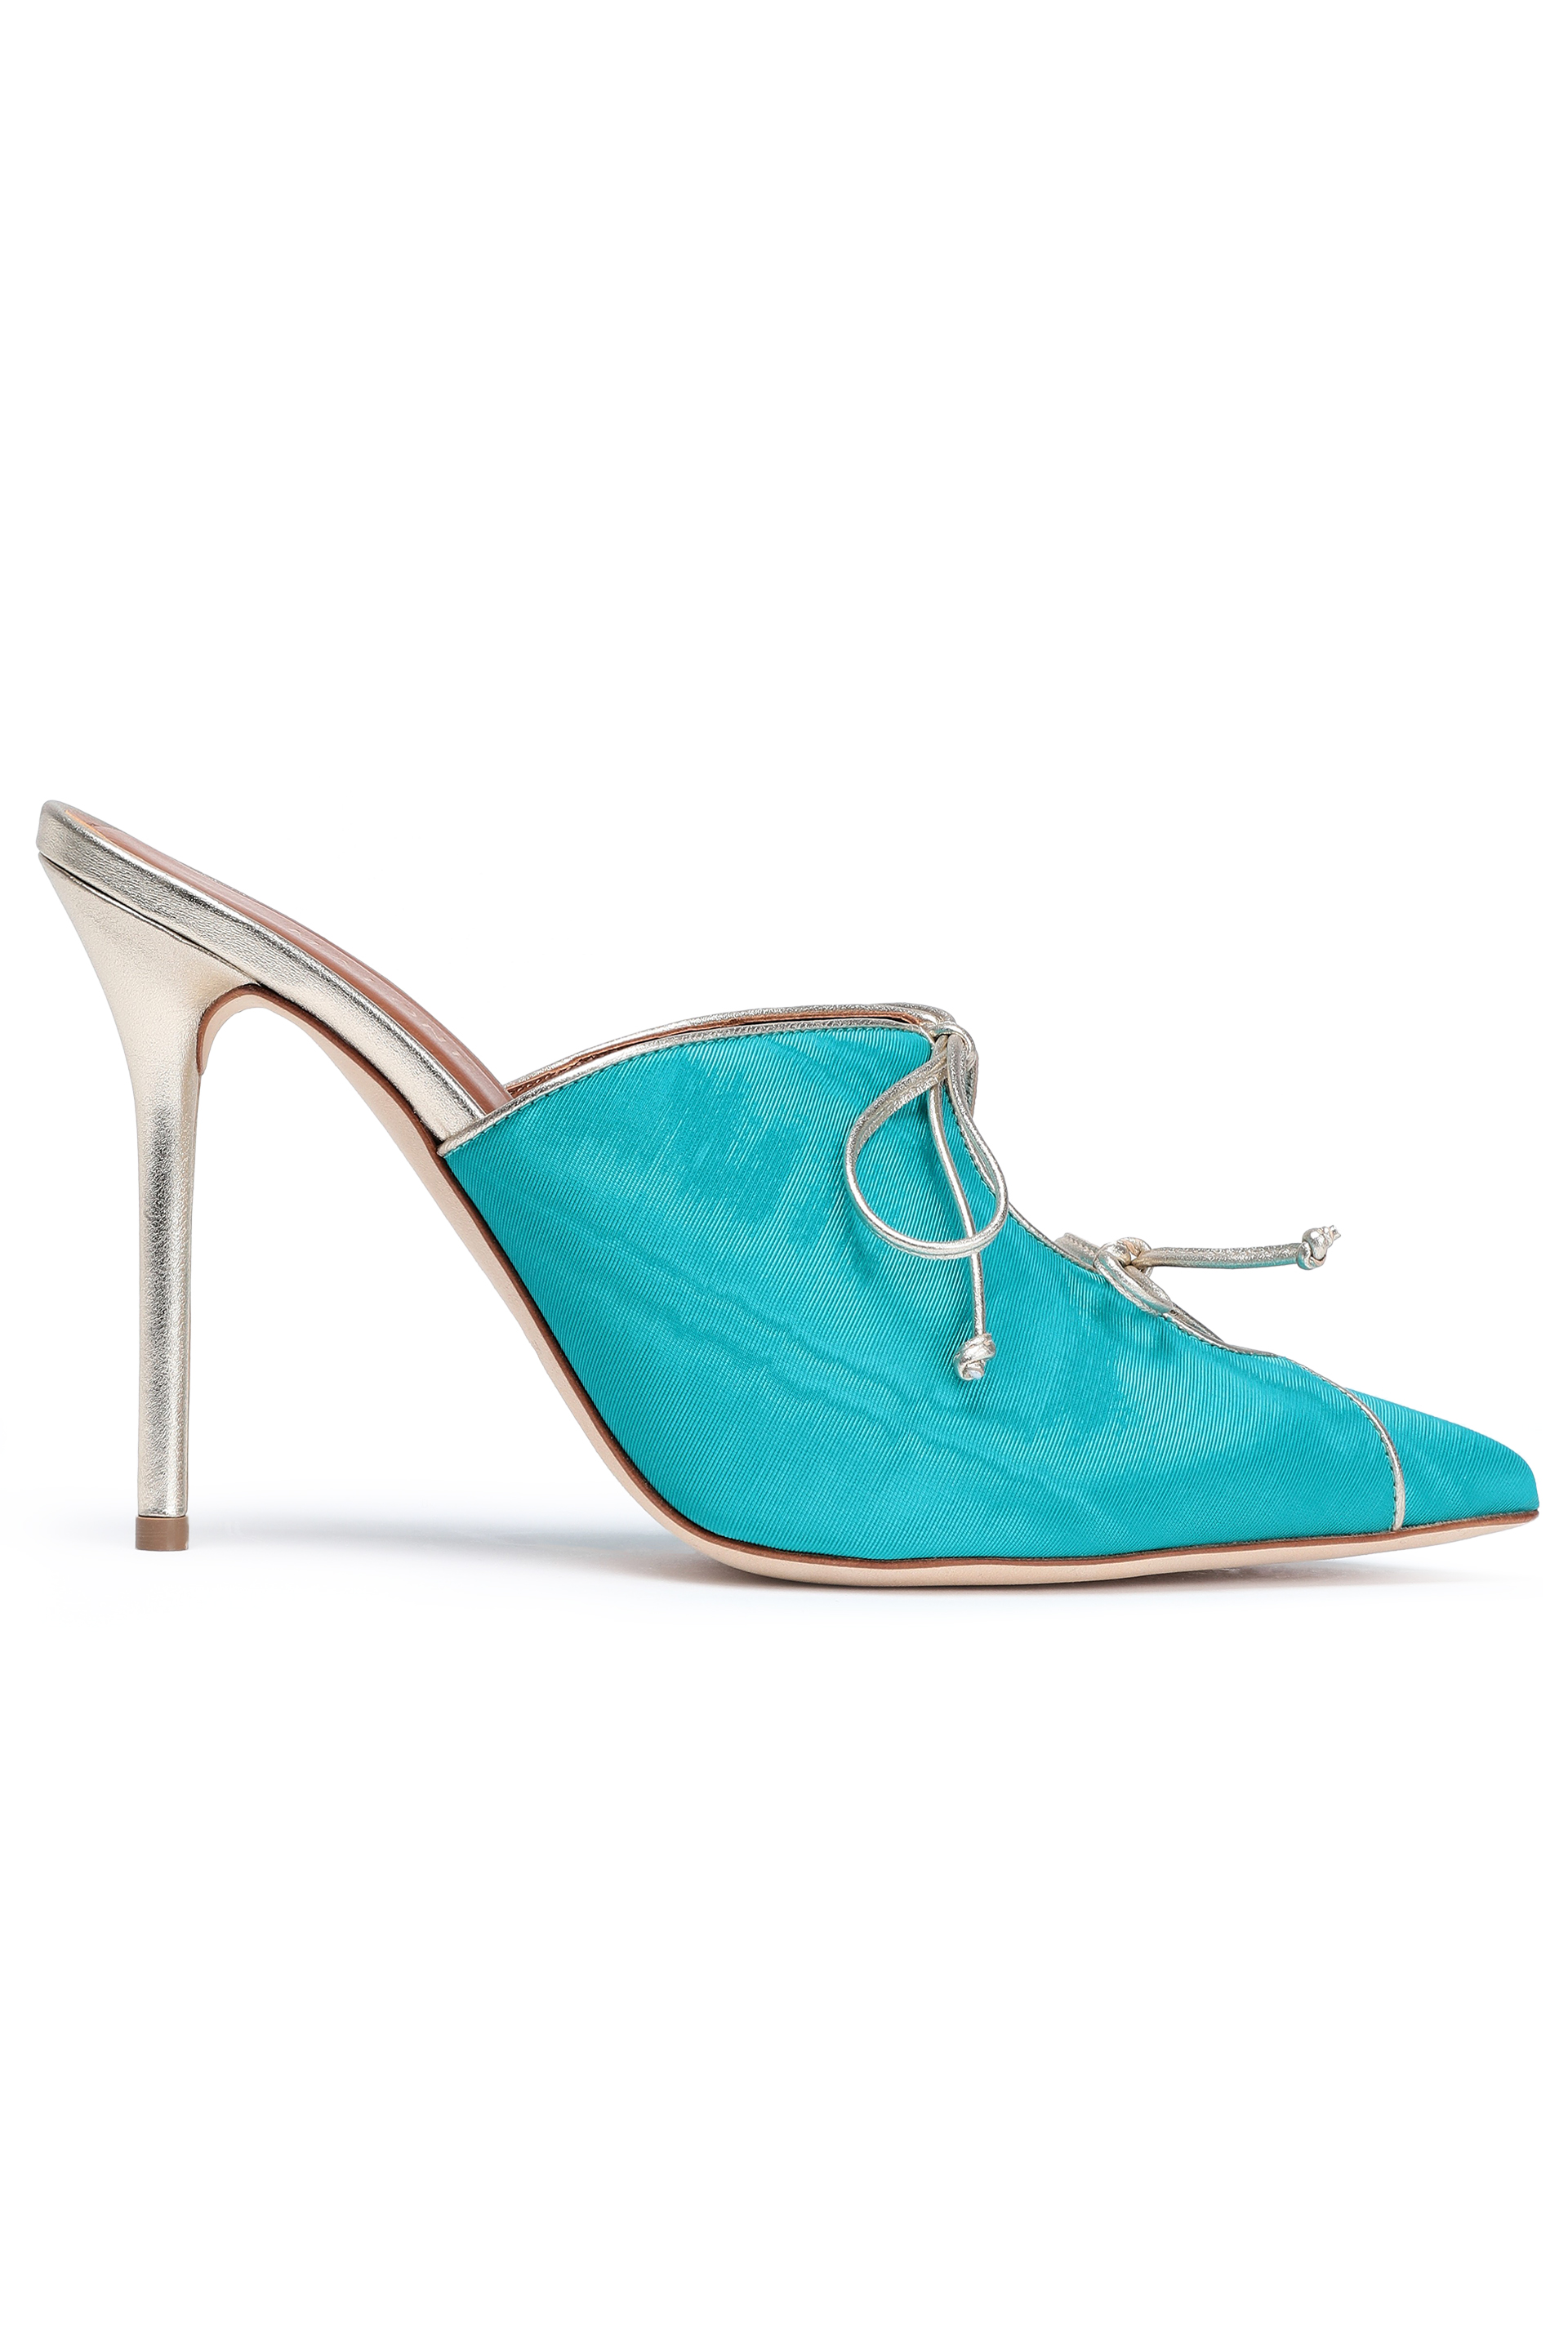 Malone Souliers | Sale up to 70% off | GB | THE OUTNET